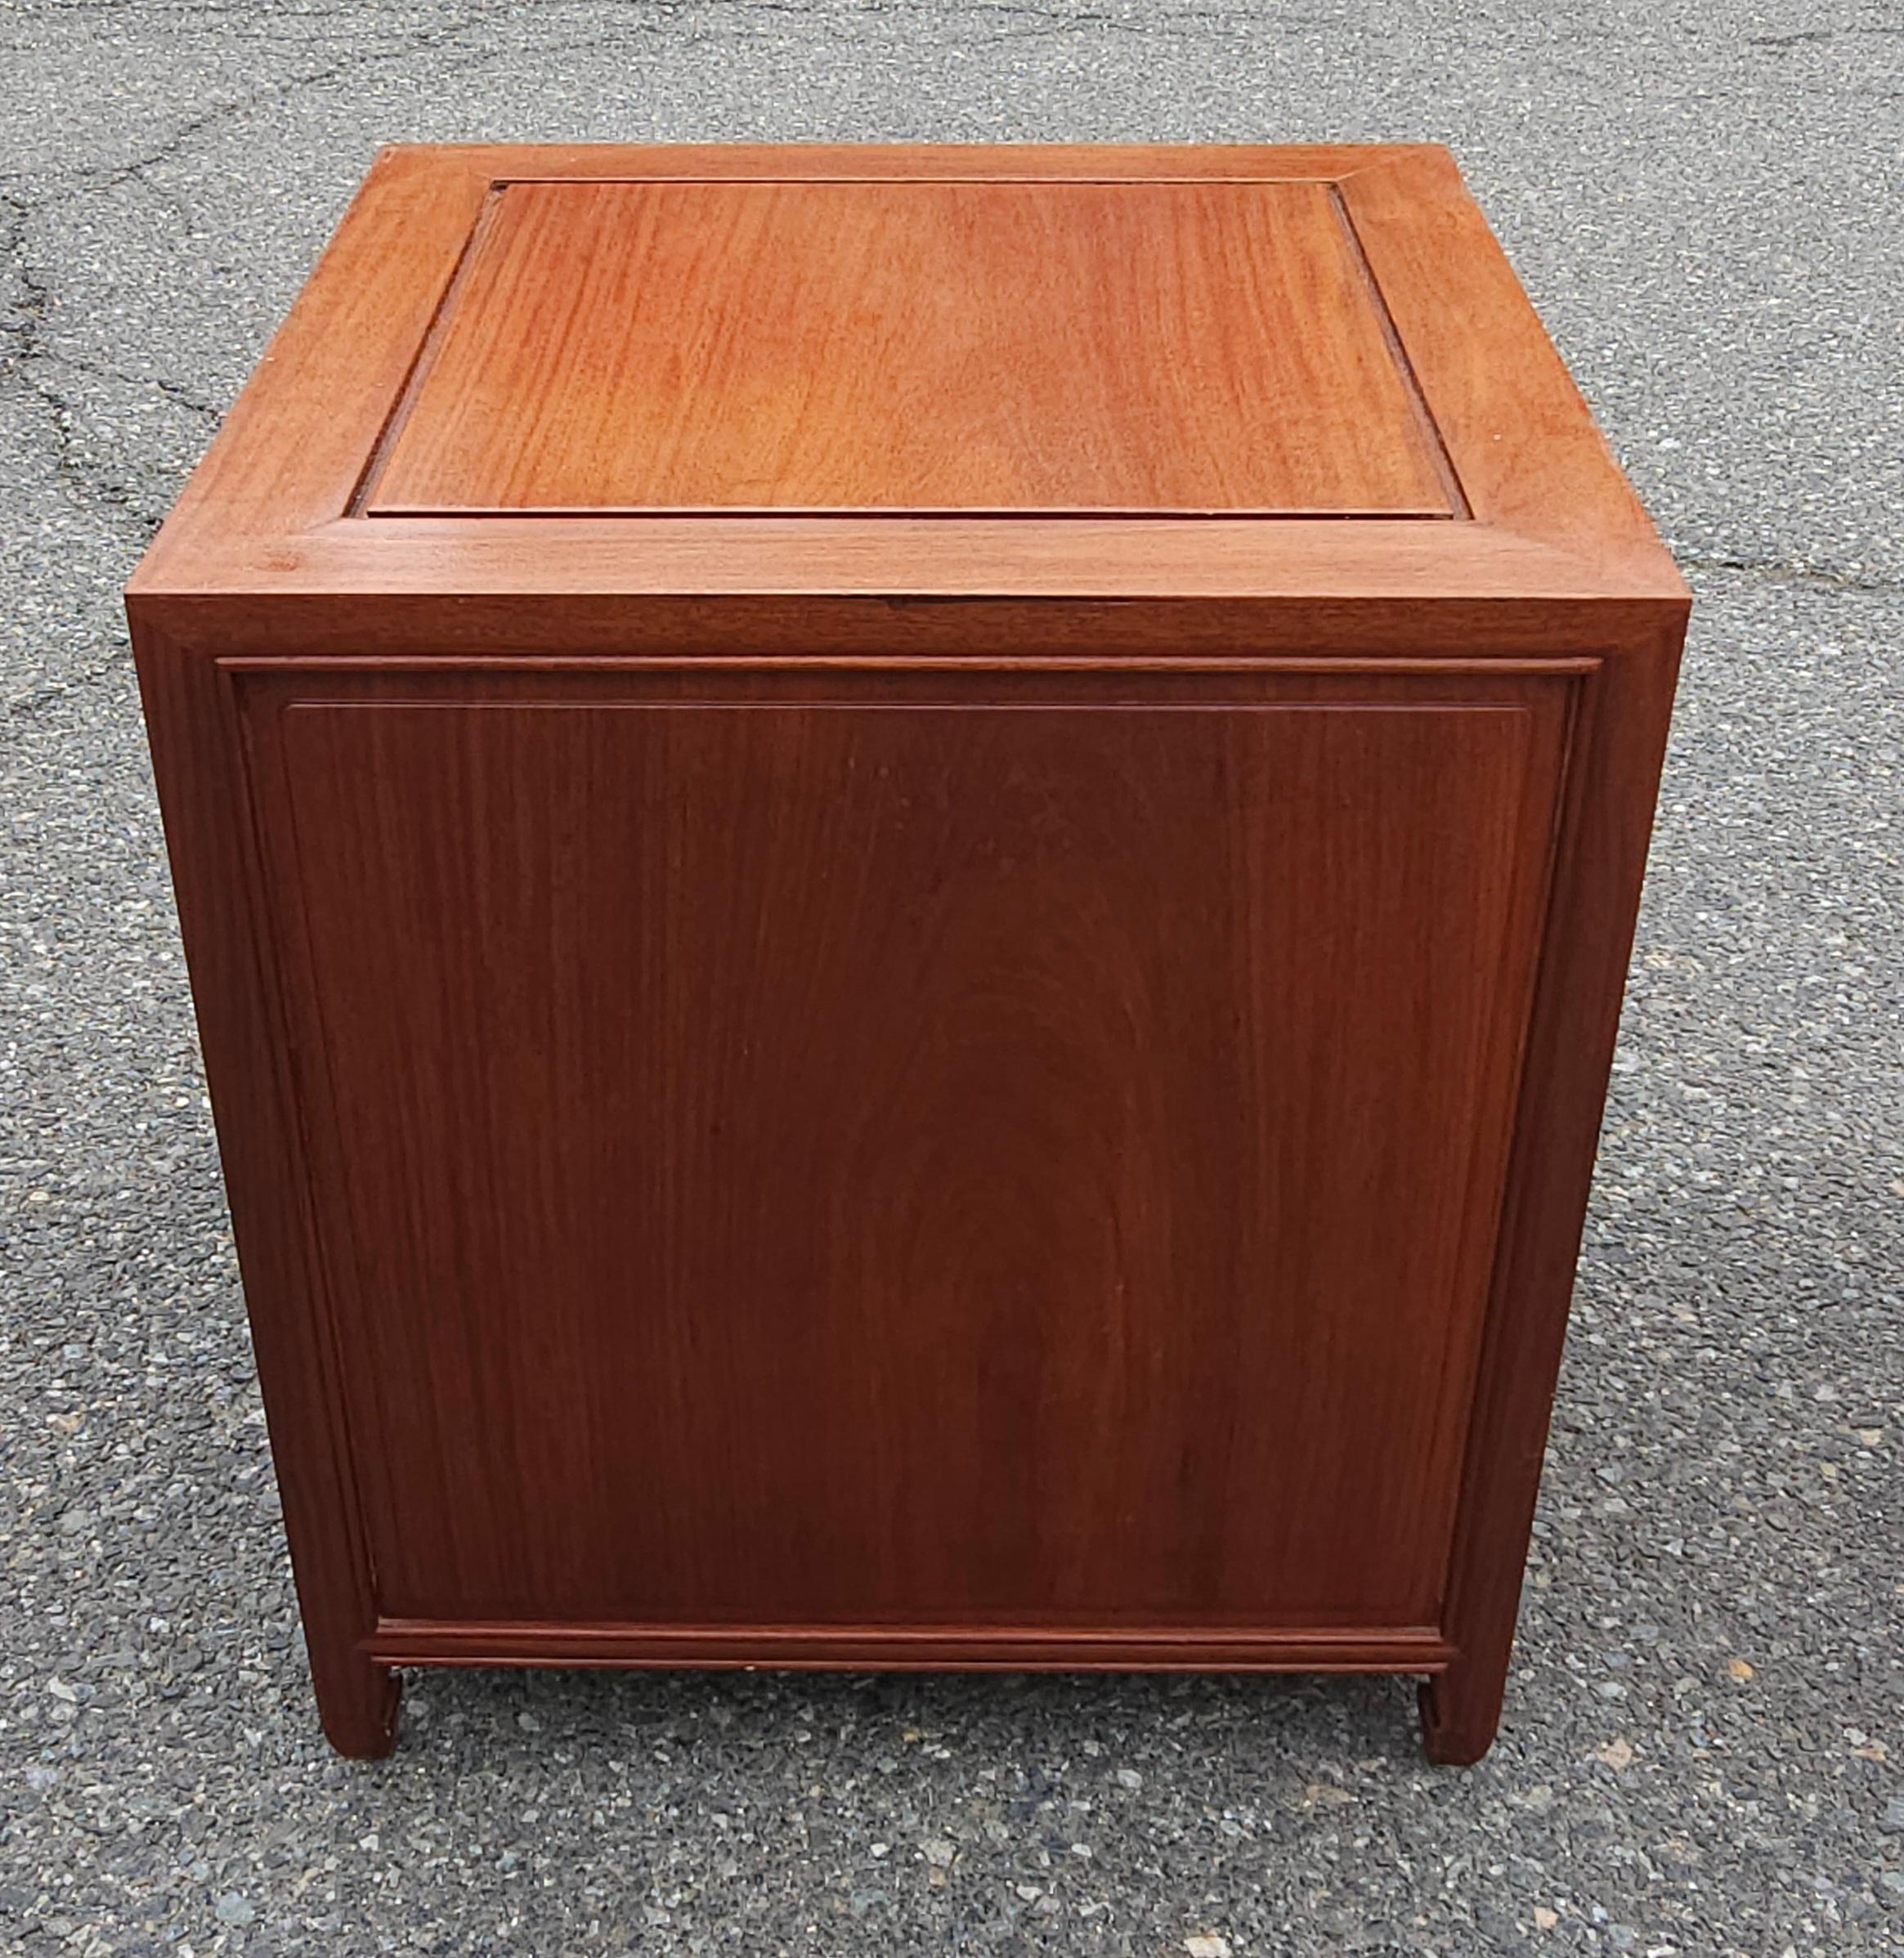 Hong Kong Pair Mid 20th Century Ming Style Rosewood Side Table Cabinets with Glass Top For Sale